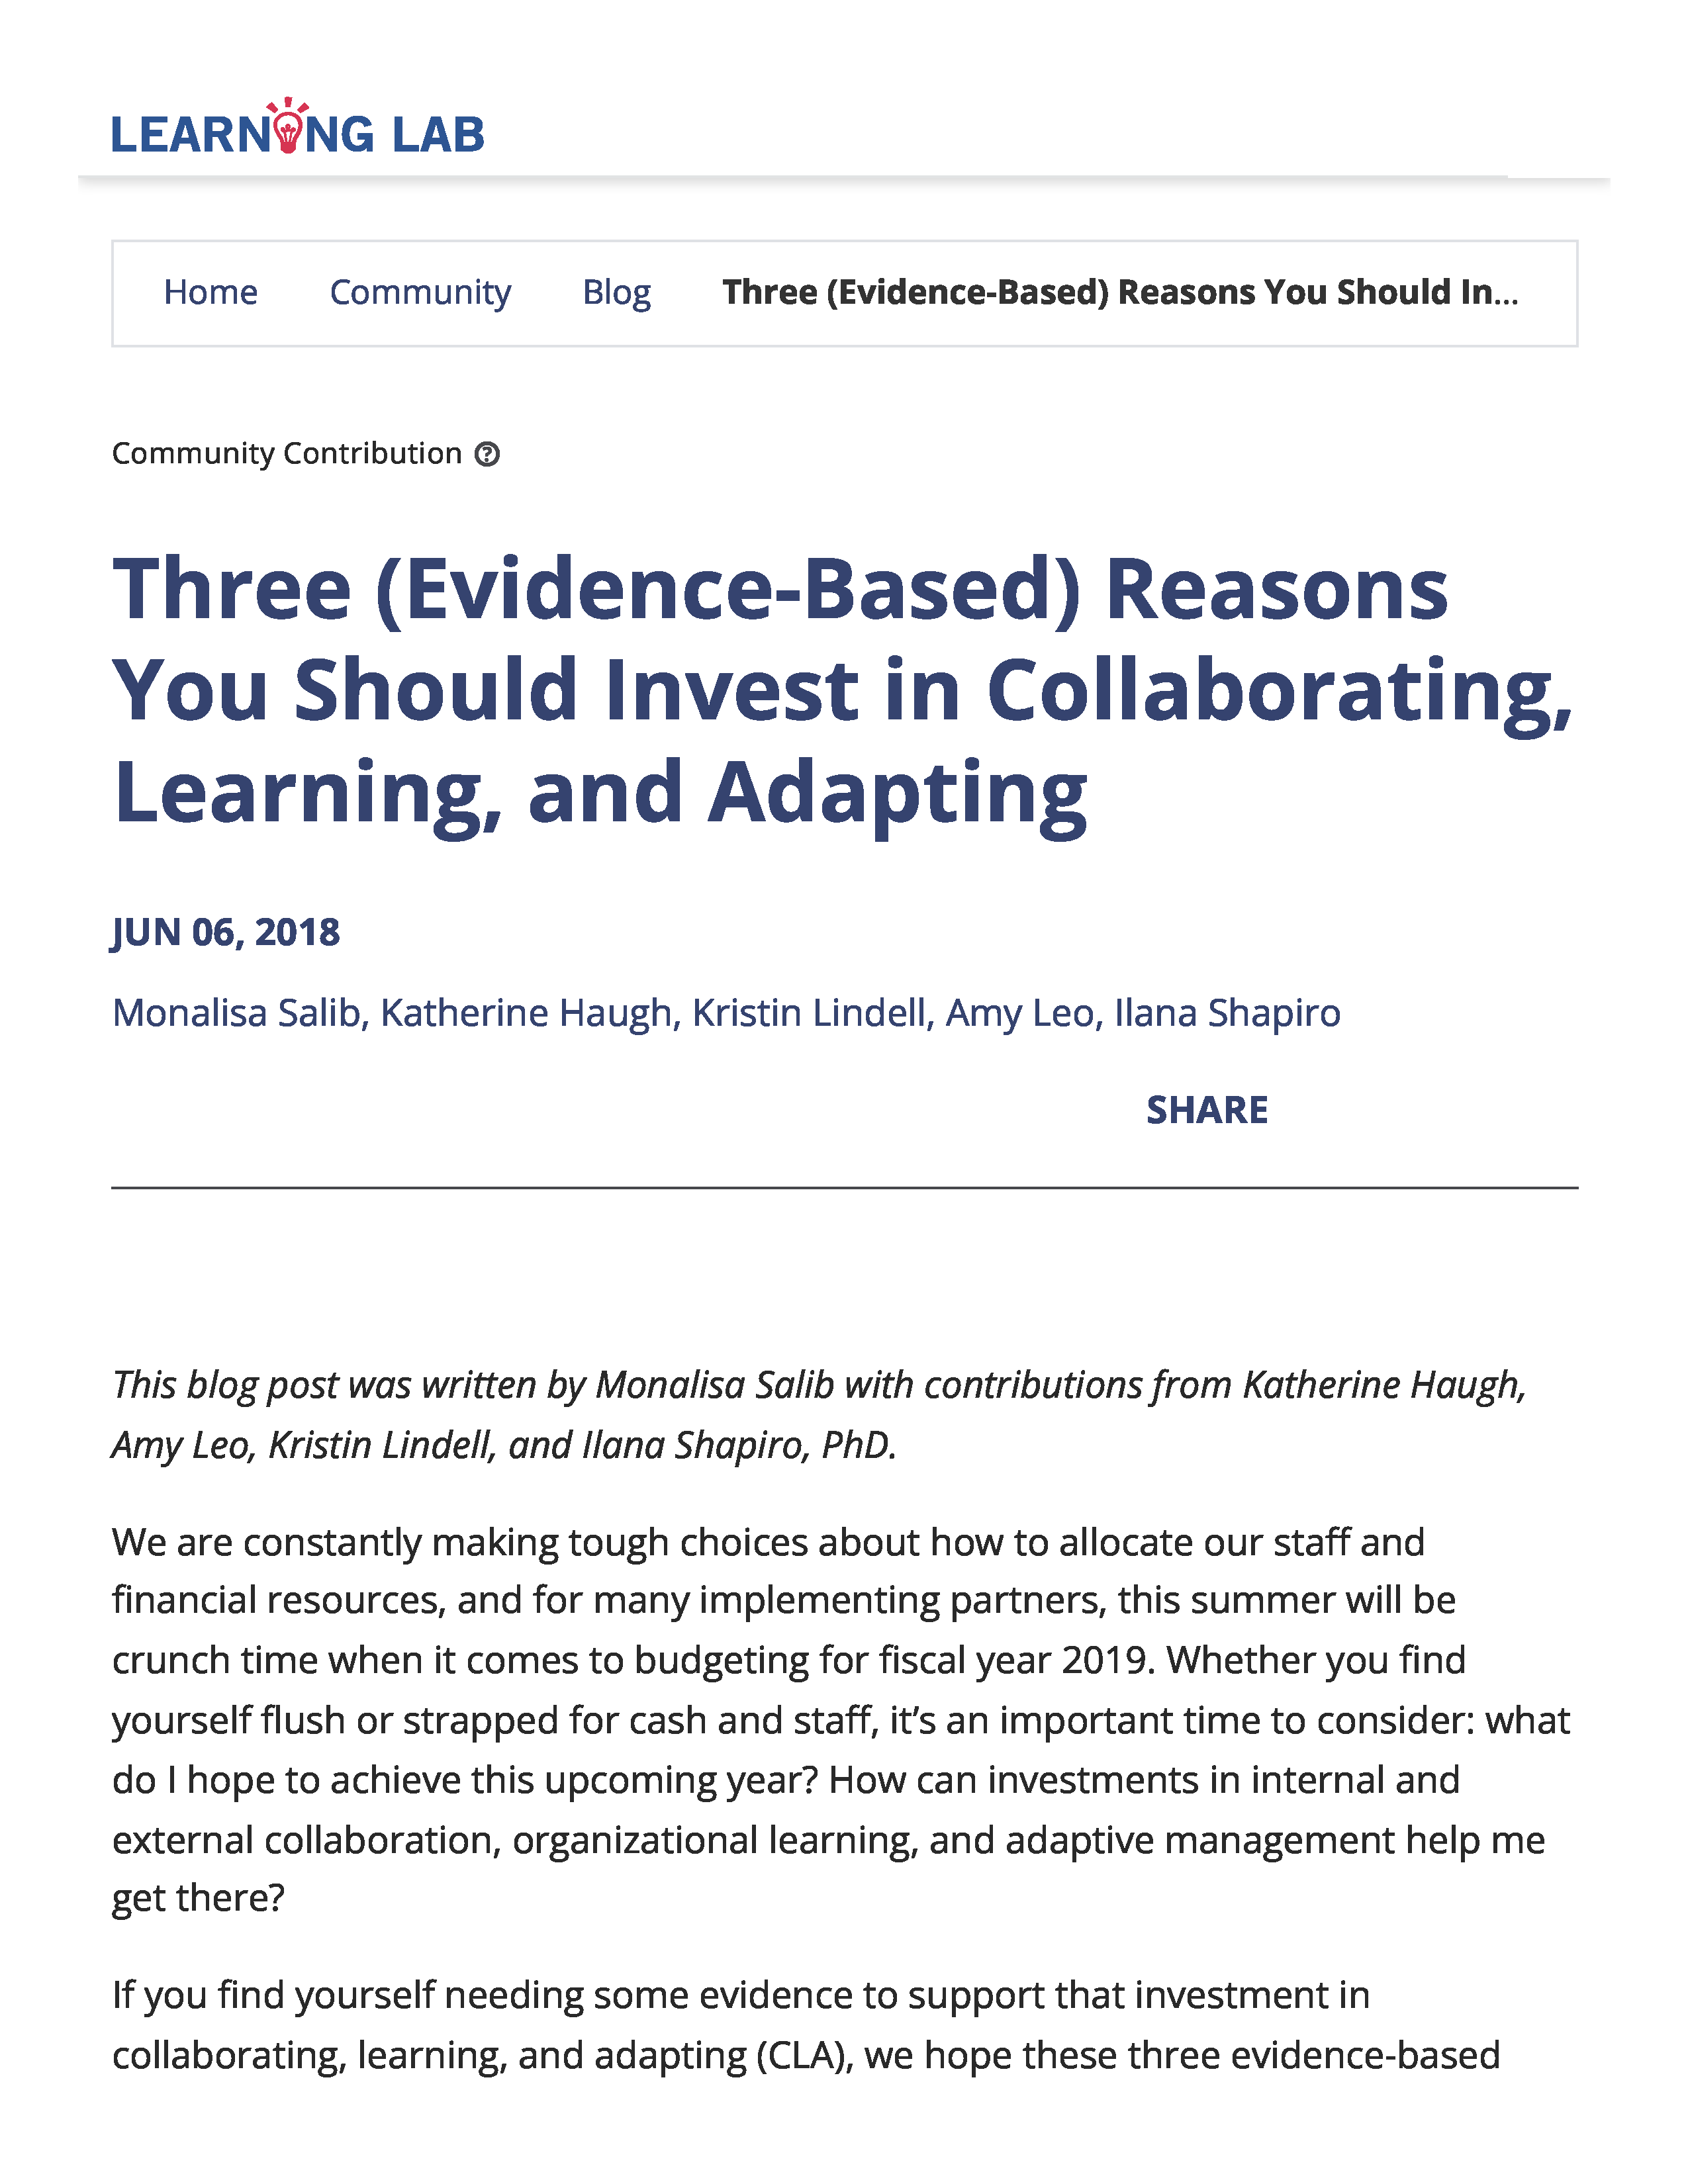 Cover page for Three (Evidence-Based) Reasons You Should Invest in Collaborating, Learning, and Adapting